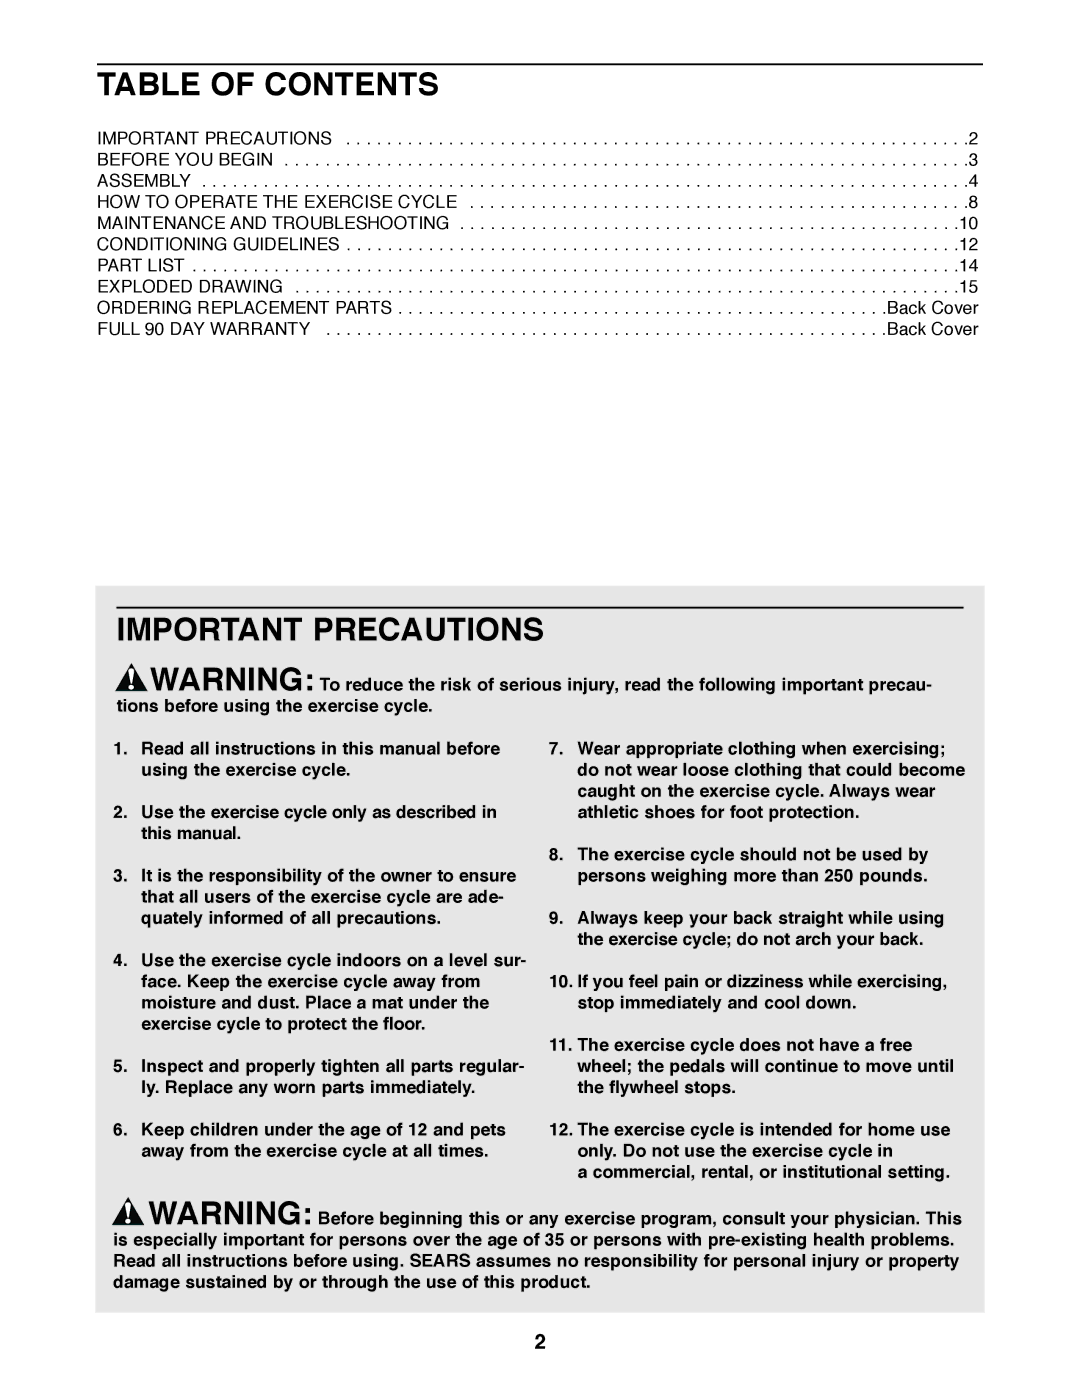 Weslo 831.283160 user manual Table of Contents, Important Precautions 